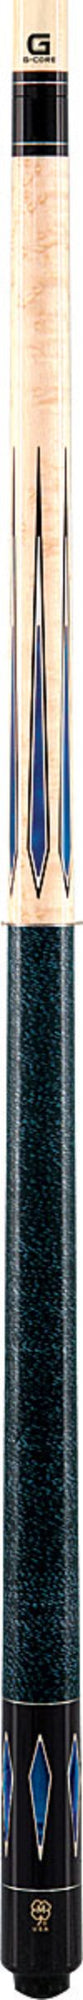 McDermott McDermott G324 Pool Cue with G-Core Shaft Pool Cue